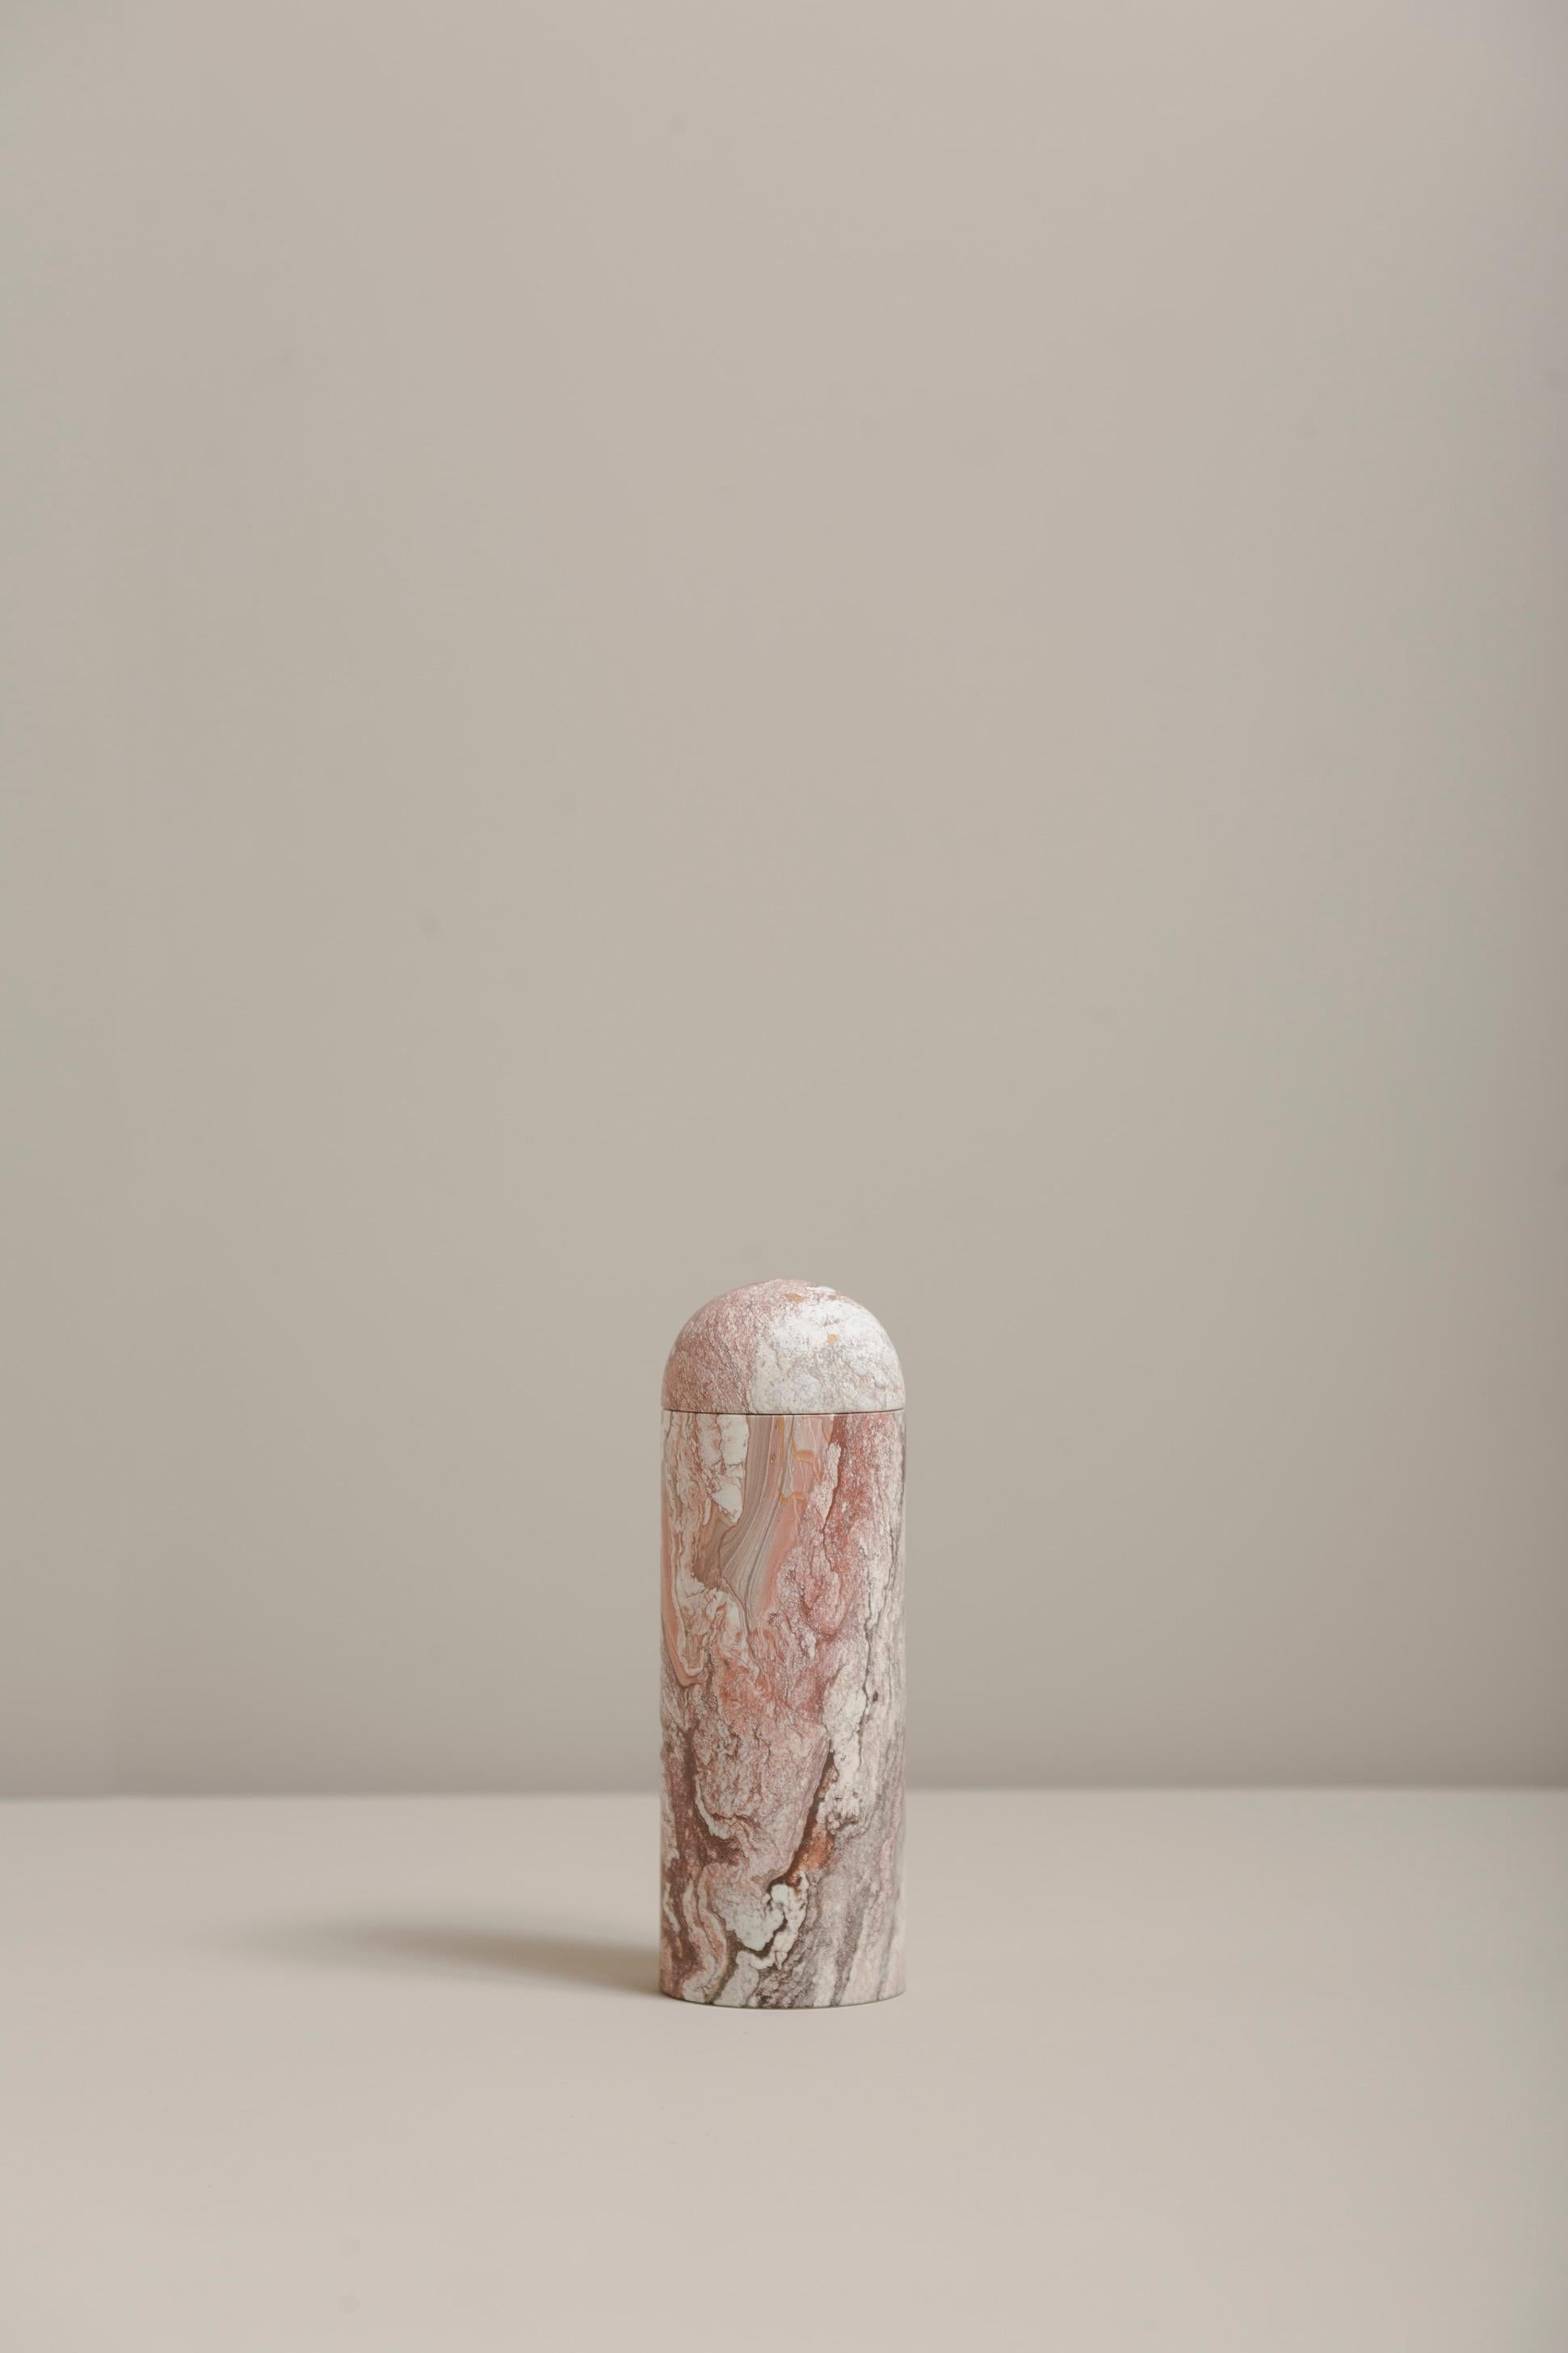 Monolith by Bravo Studio
Monolith EEE1
Materials: Cobarbalita stone
Dimensions: Ø 6 × 17.5 cm

 
Monolithic objects in Cobarbalita stone
This new series of objects developed by the Chilean design studio bravo! Continues with the logic of